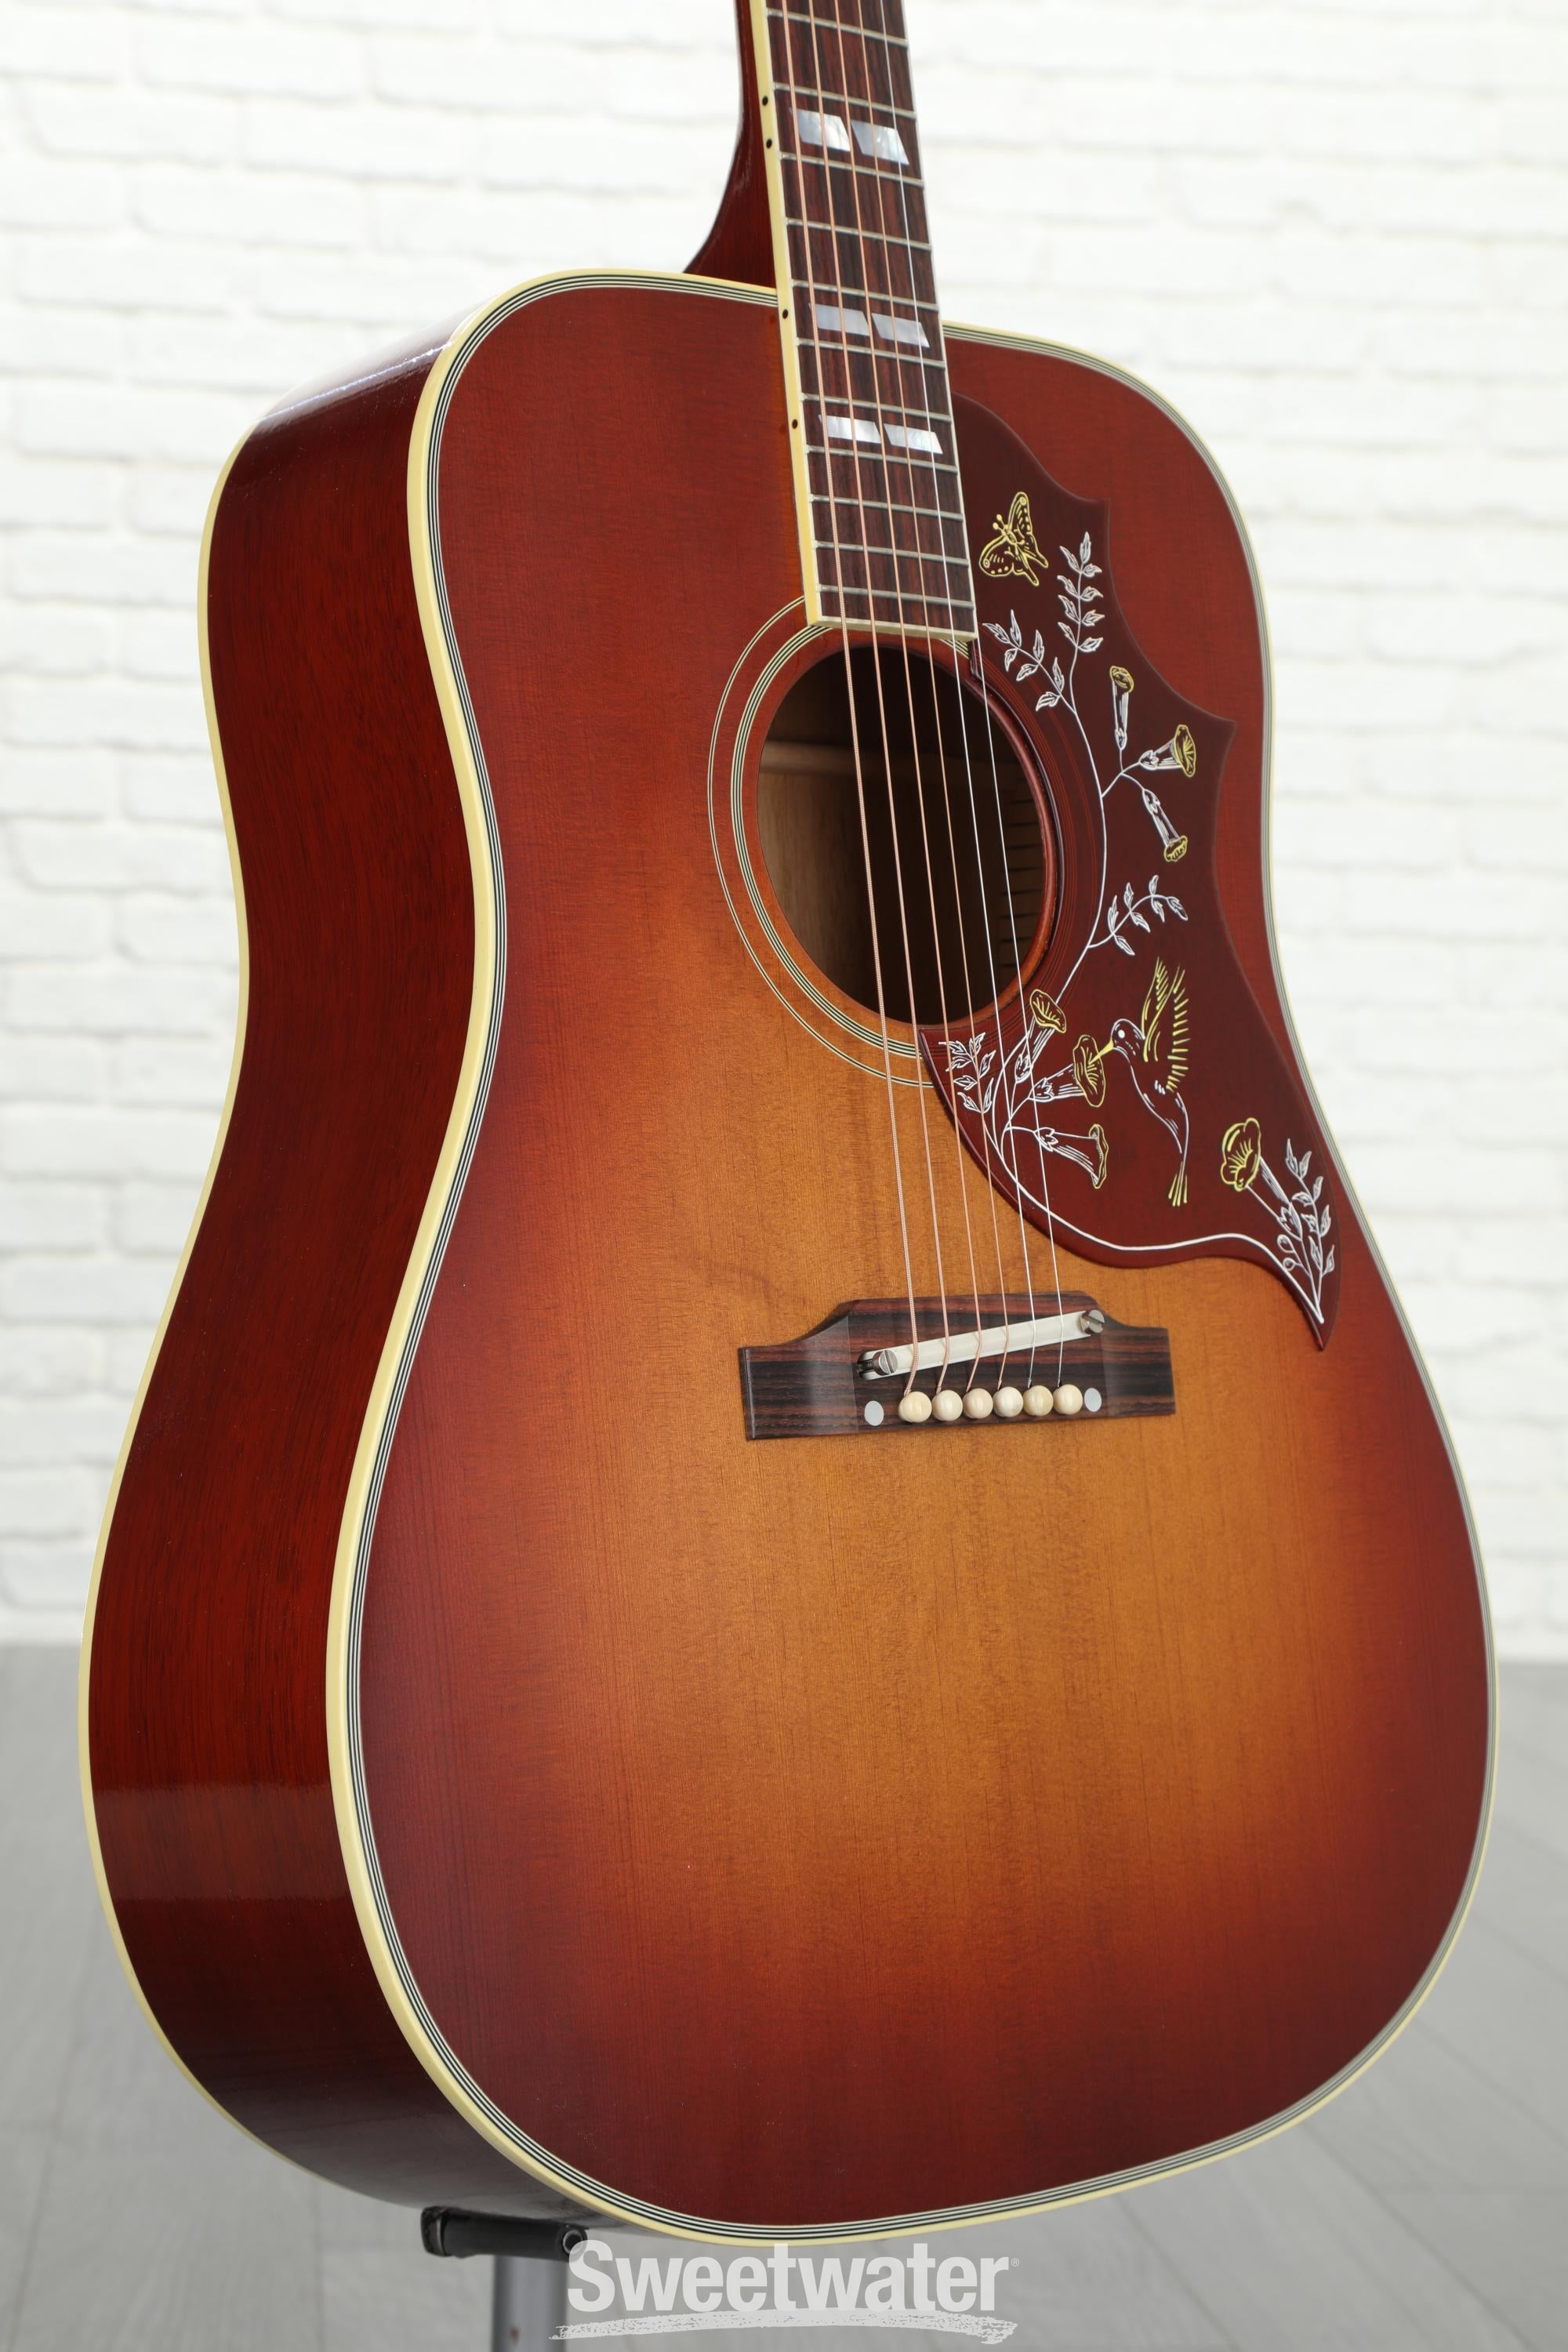 Gibson Acoustic 1960 Hummingbird Acoustic Guitar - Heritage Cherry